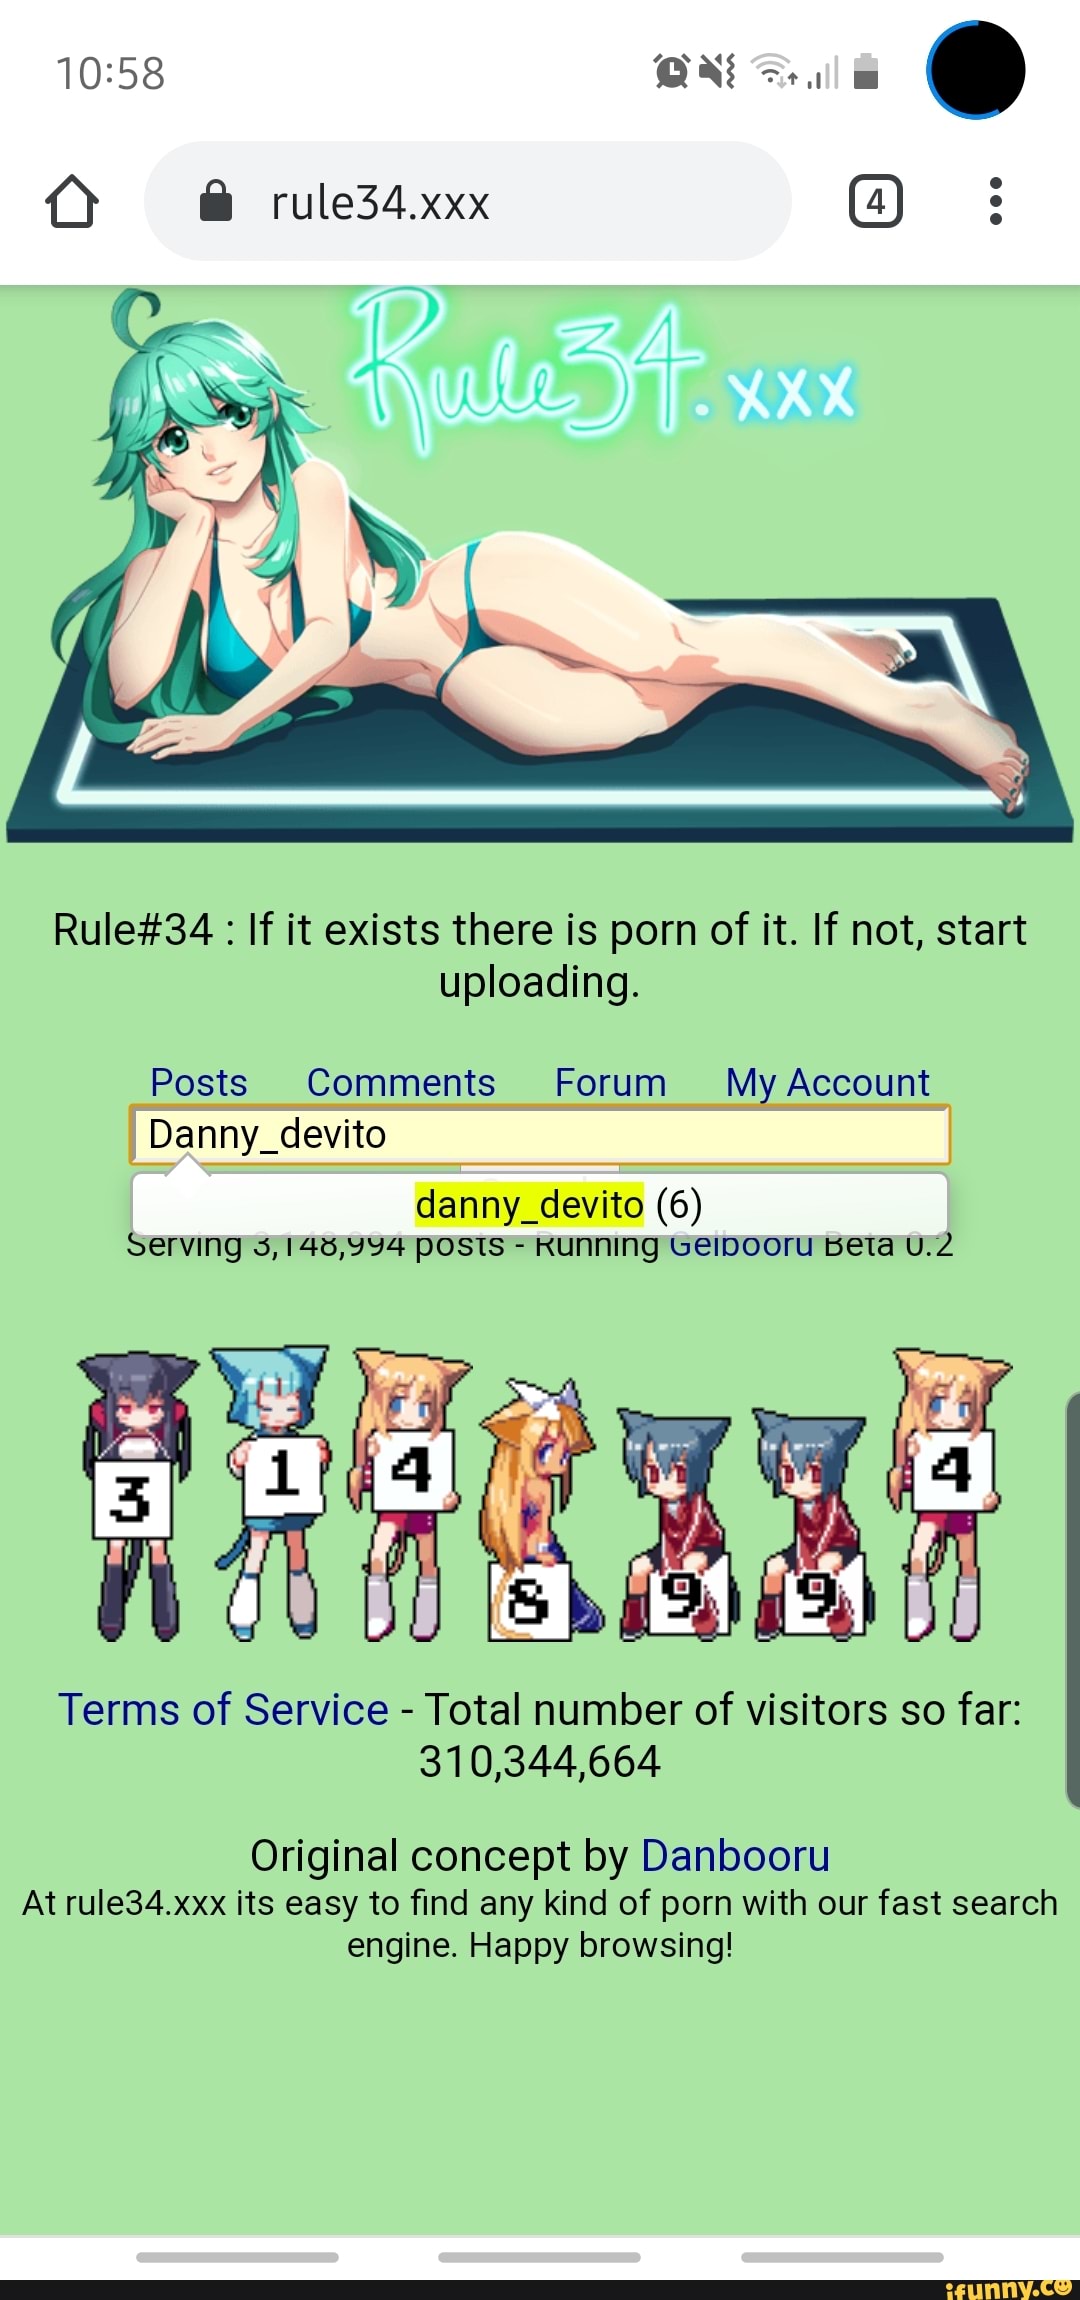 Rule #34 If it exists there is porn of it. If not, start uploading